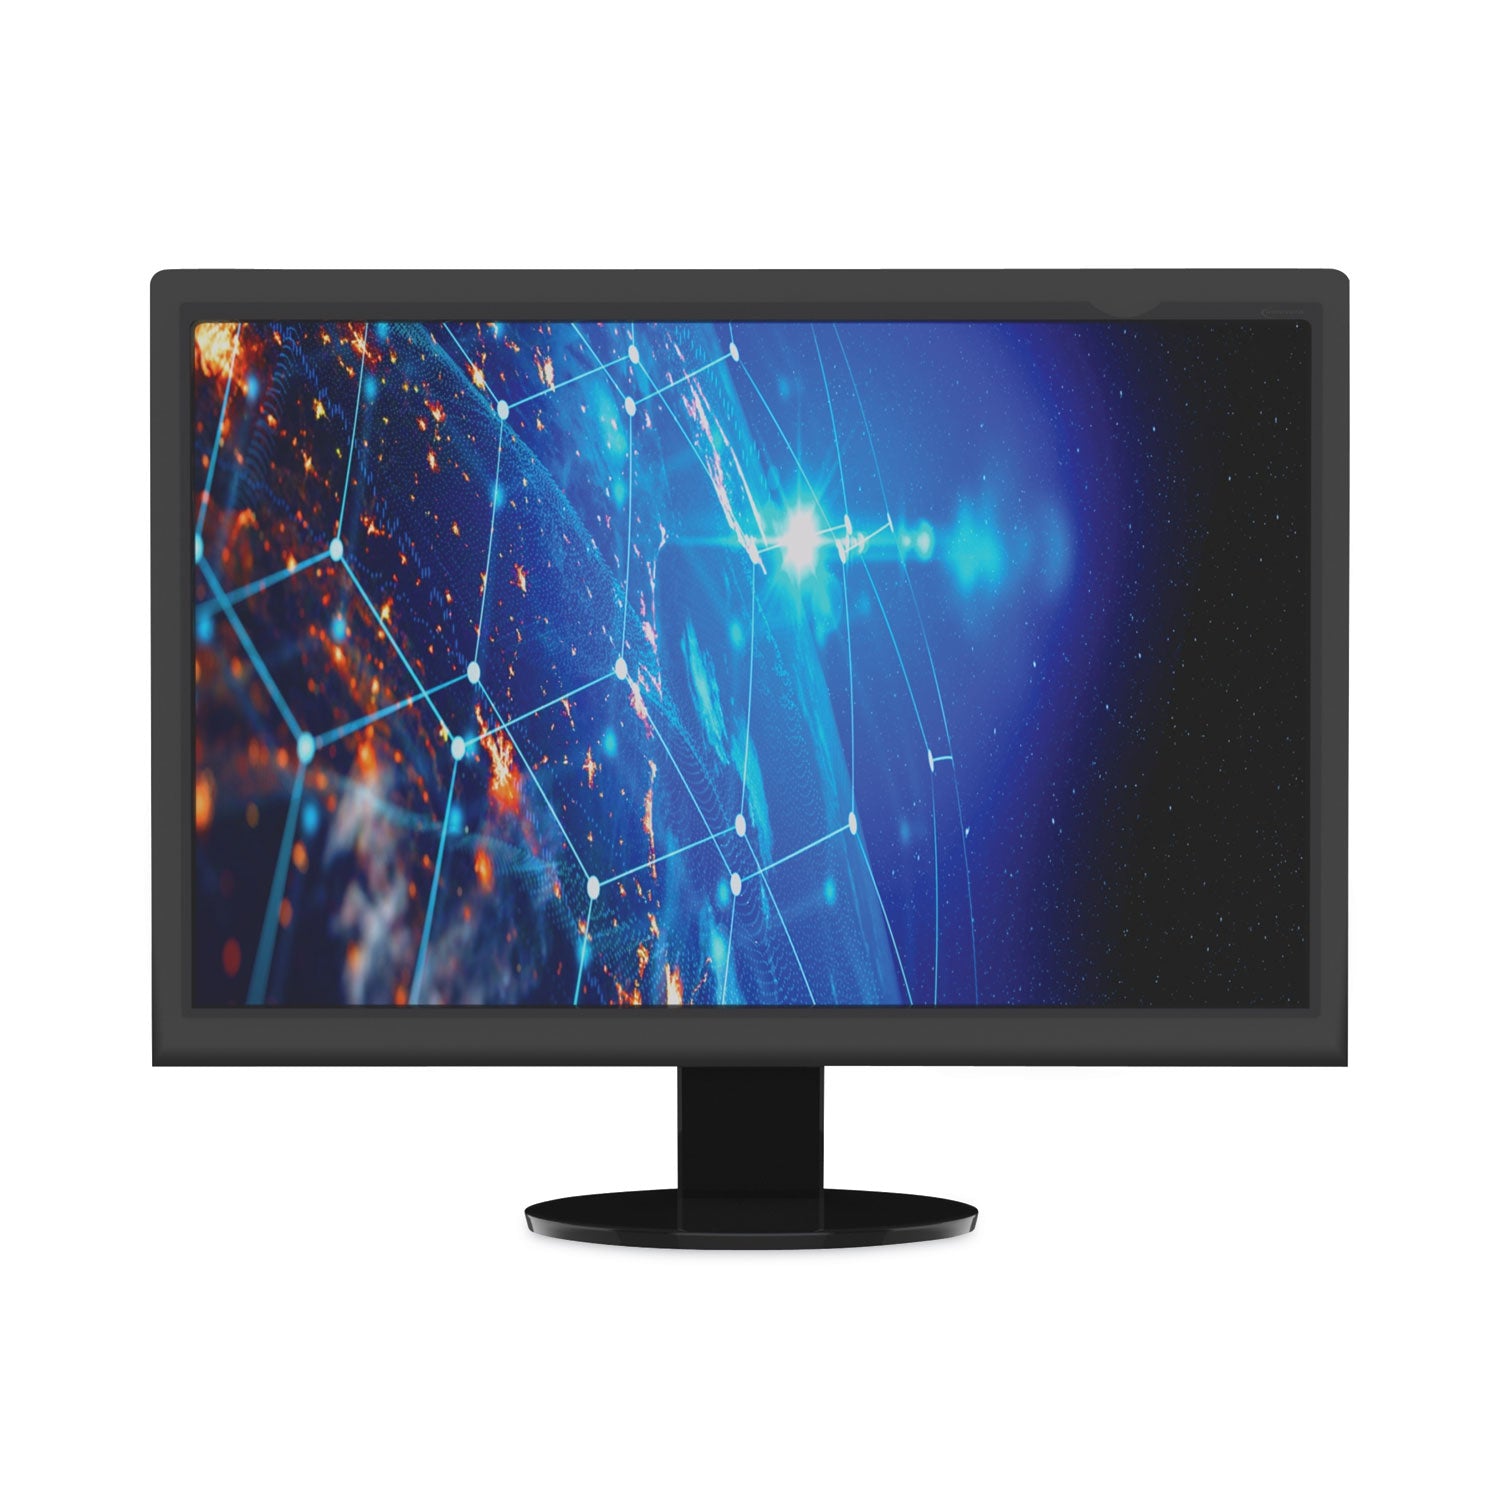 blackout-privacy-monitor-filter-for-201-widescreen-flat-panel-monitor-1610-aspect-ratio_ivrblf201w - 4